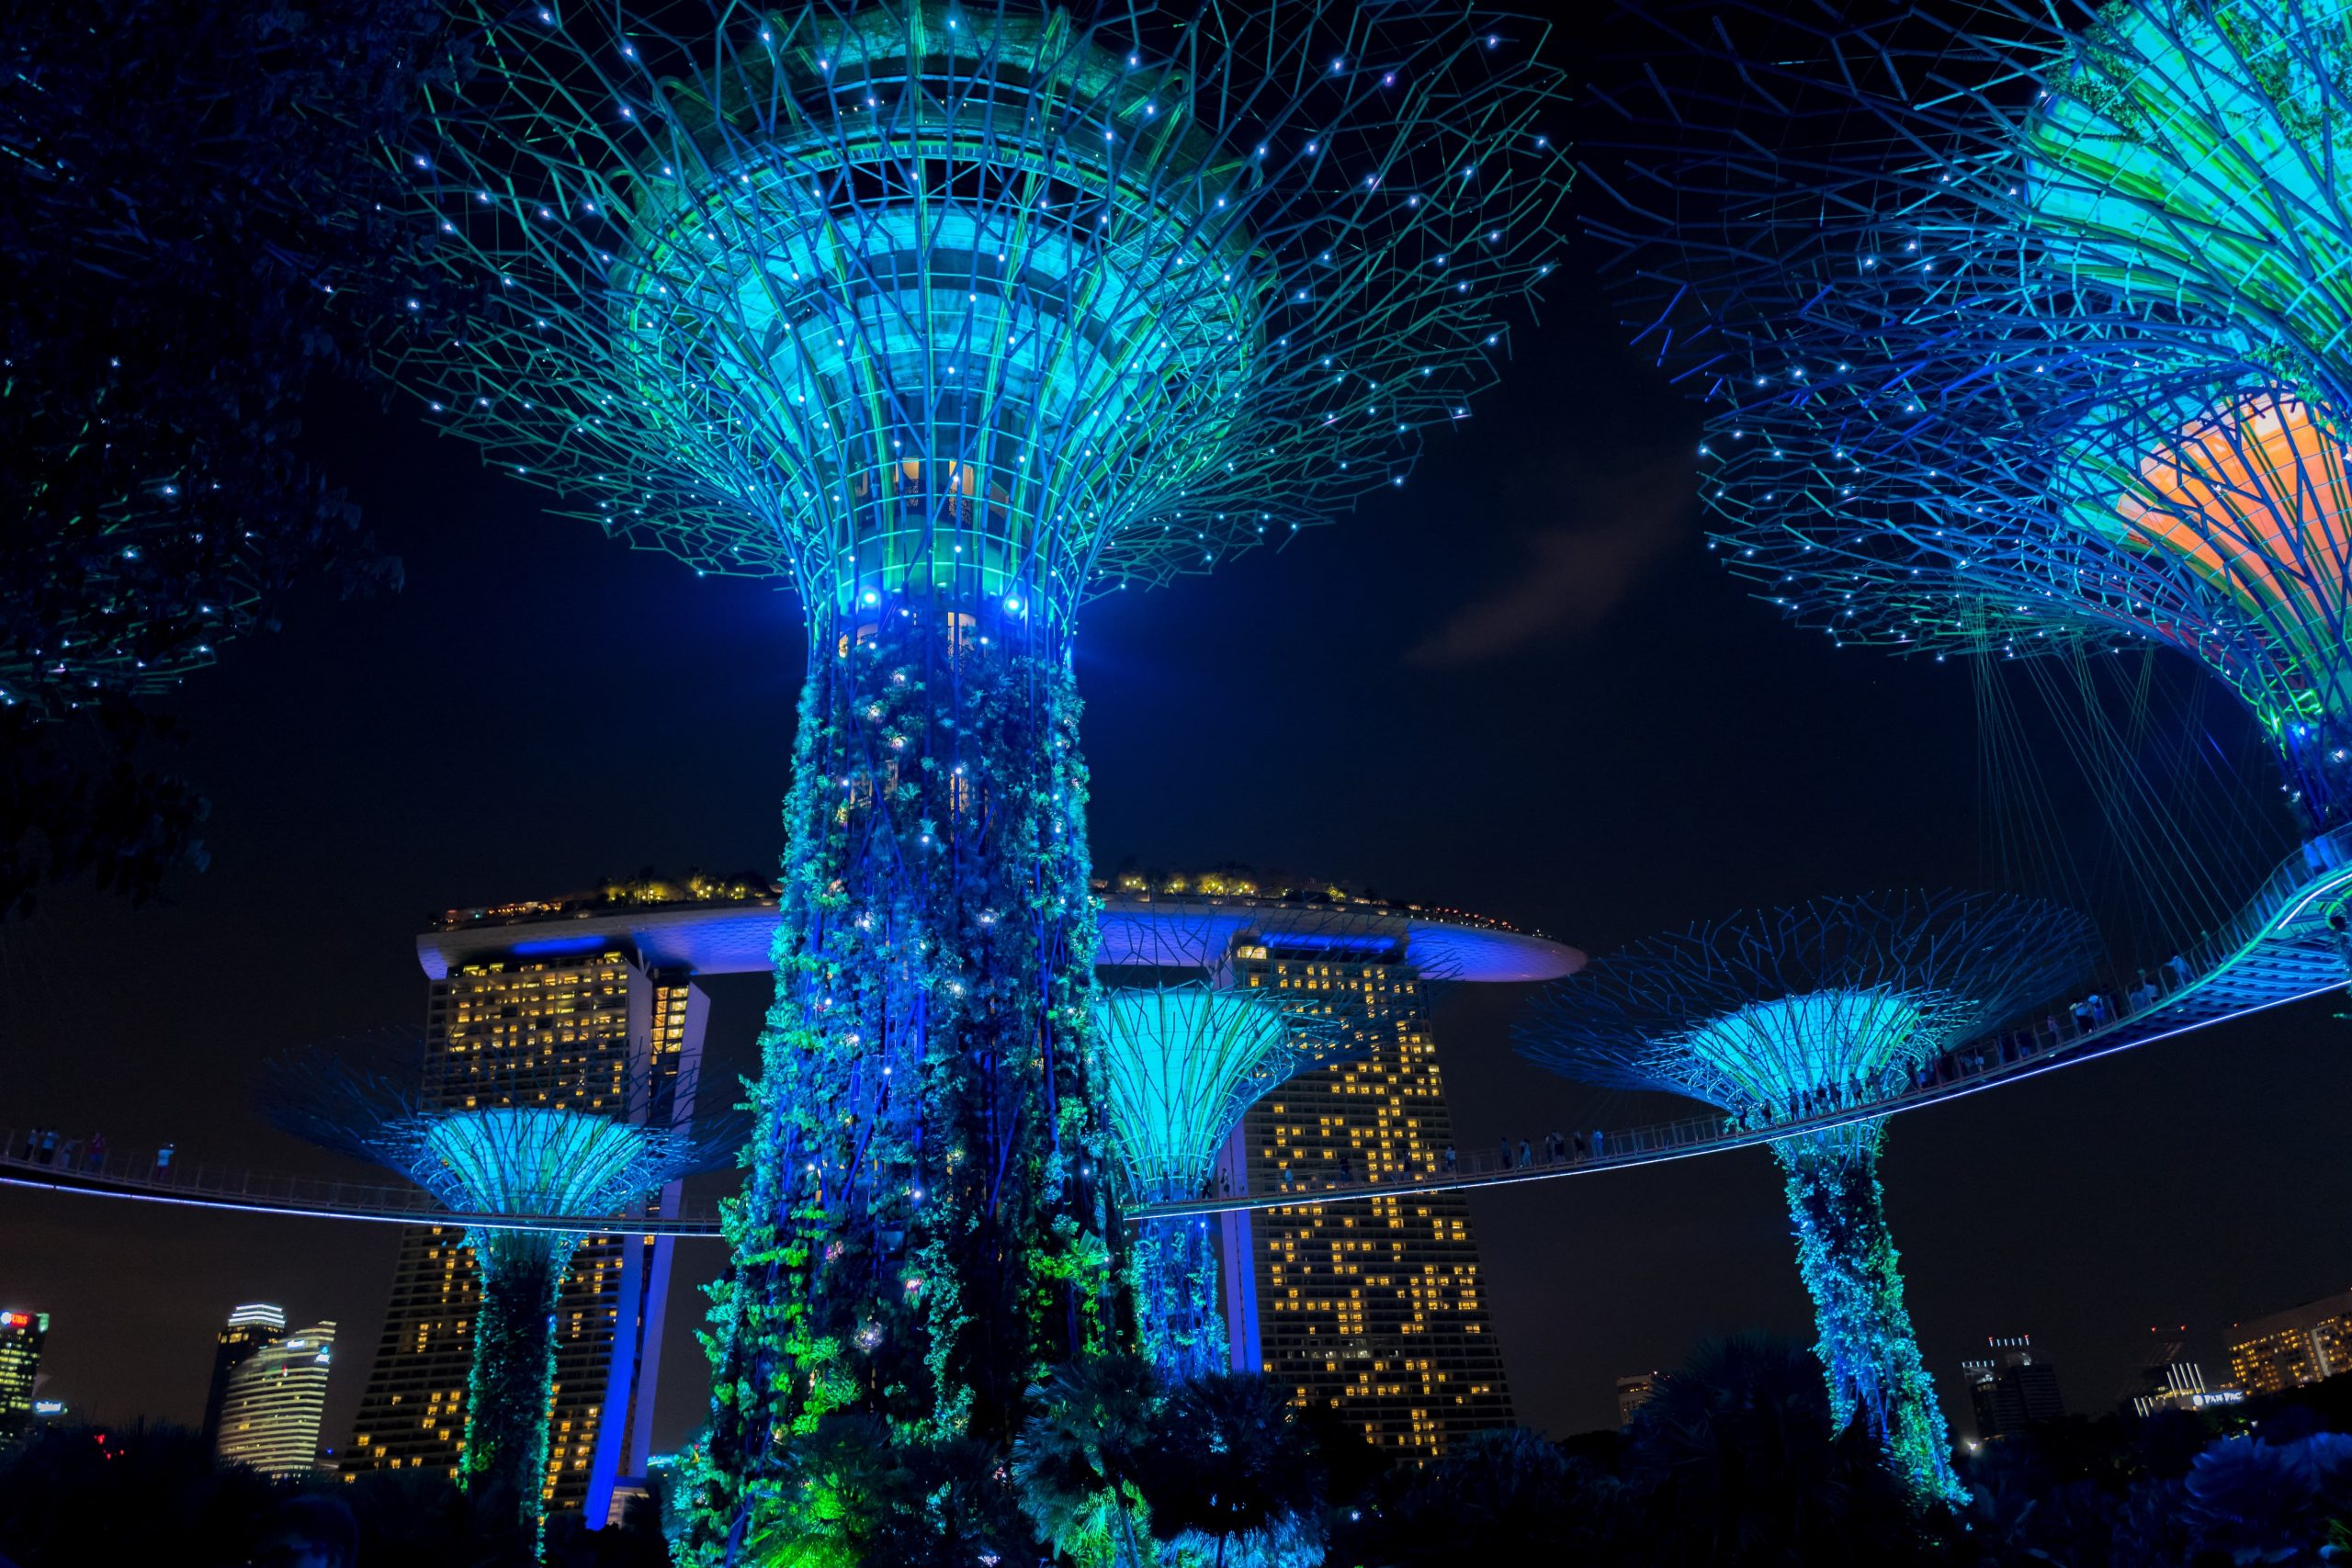 Supertree Observatory at night in Singapore